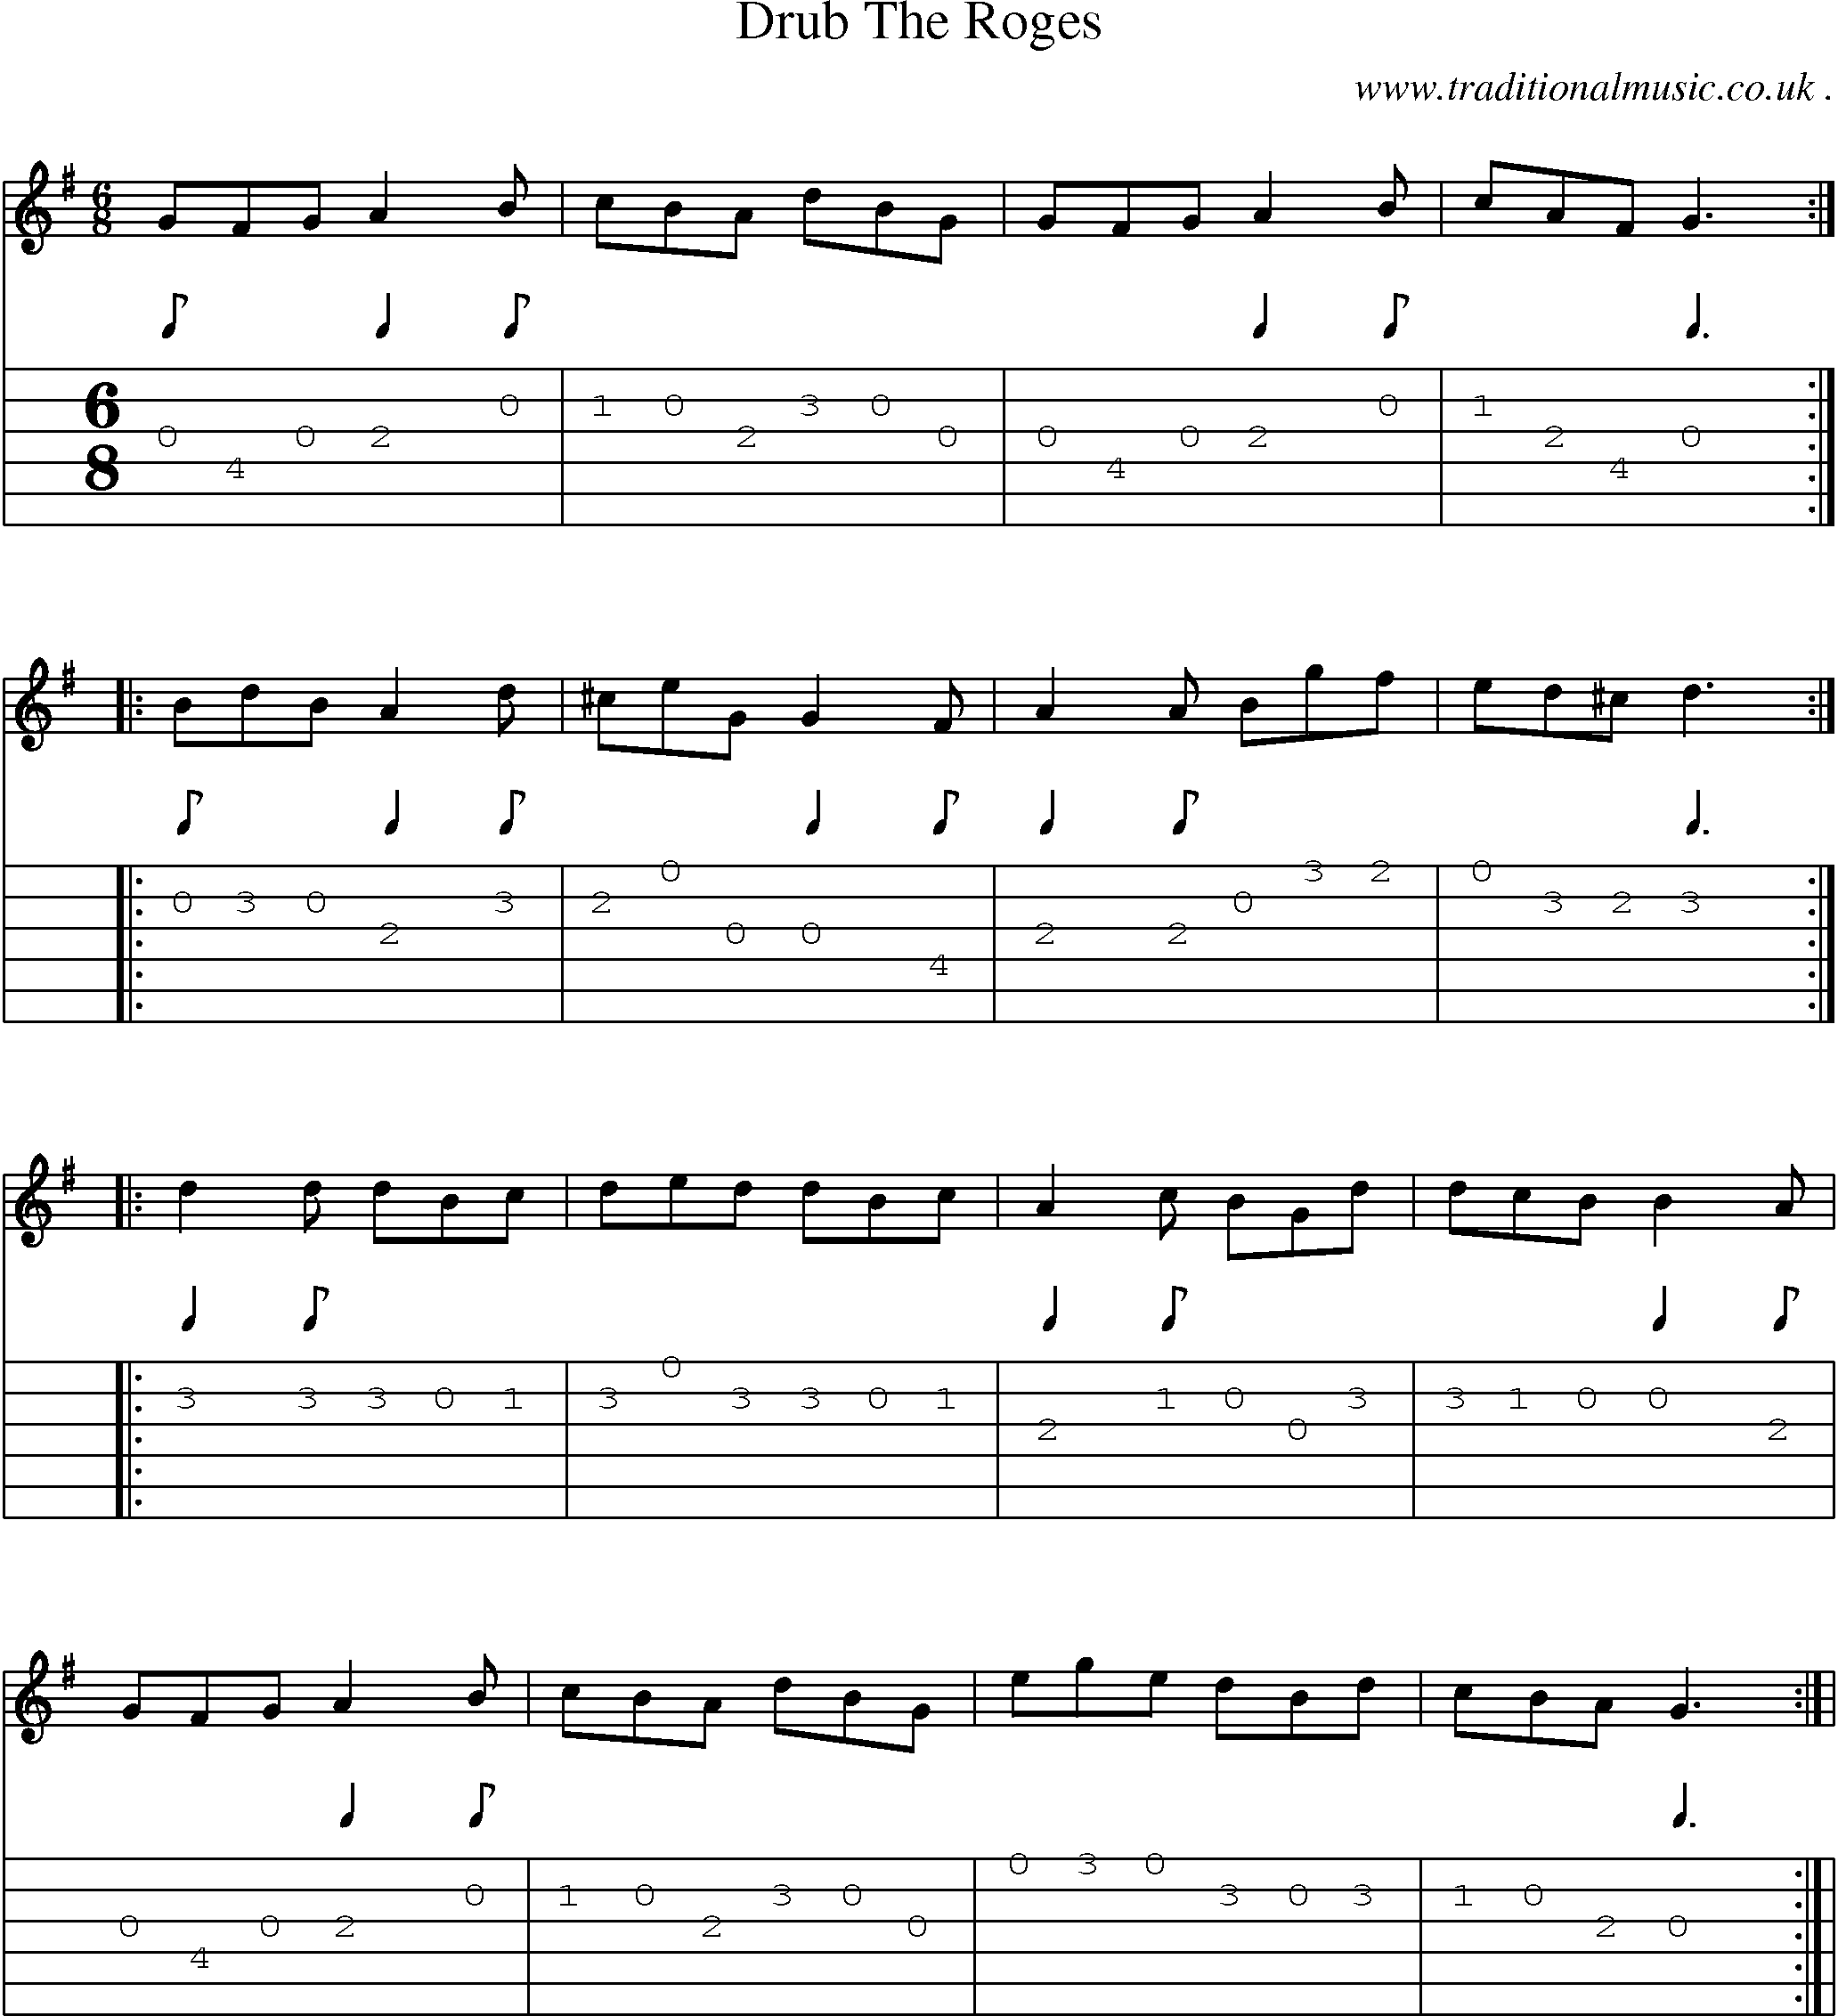 Sheet-Music and Guitar Tabs for Drub The Roges